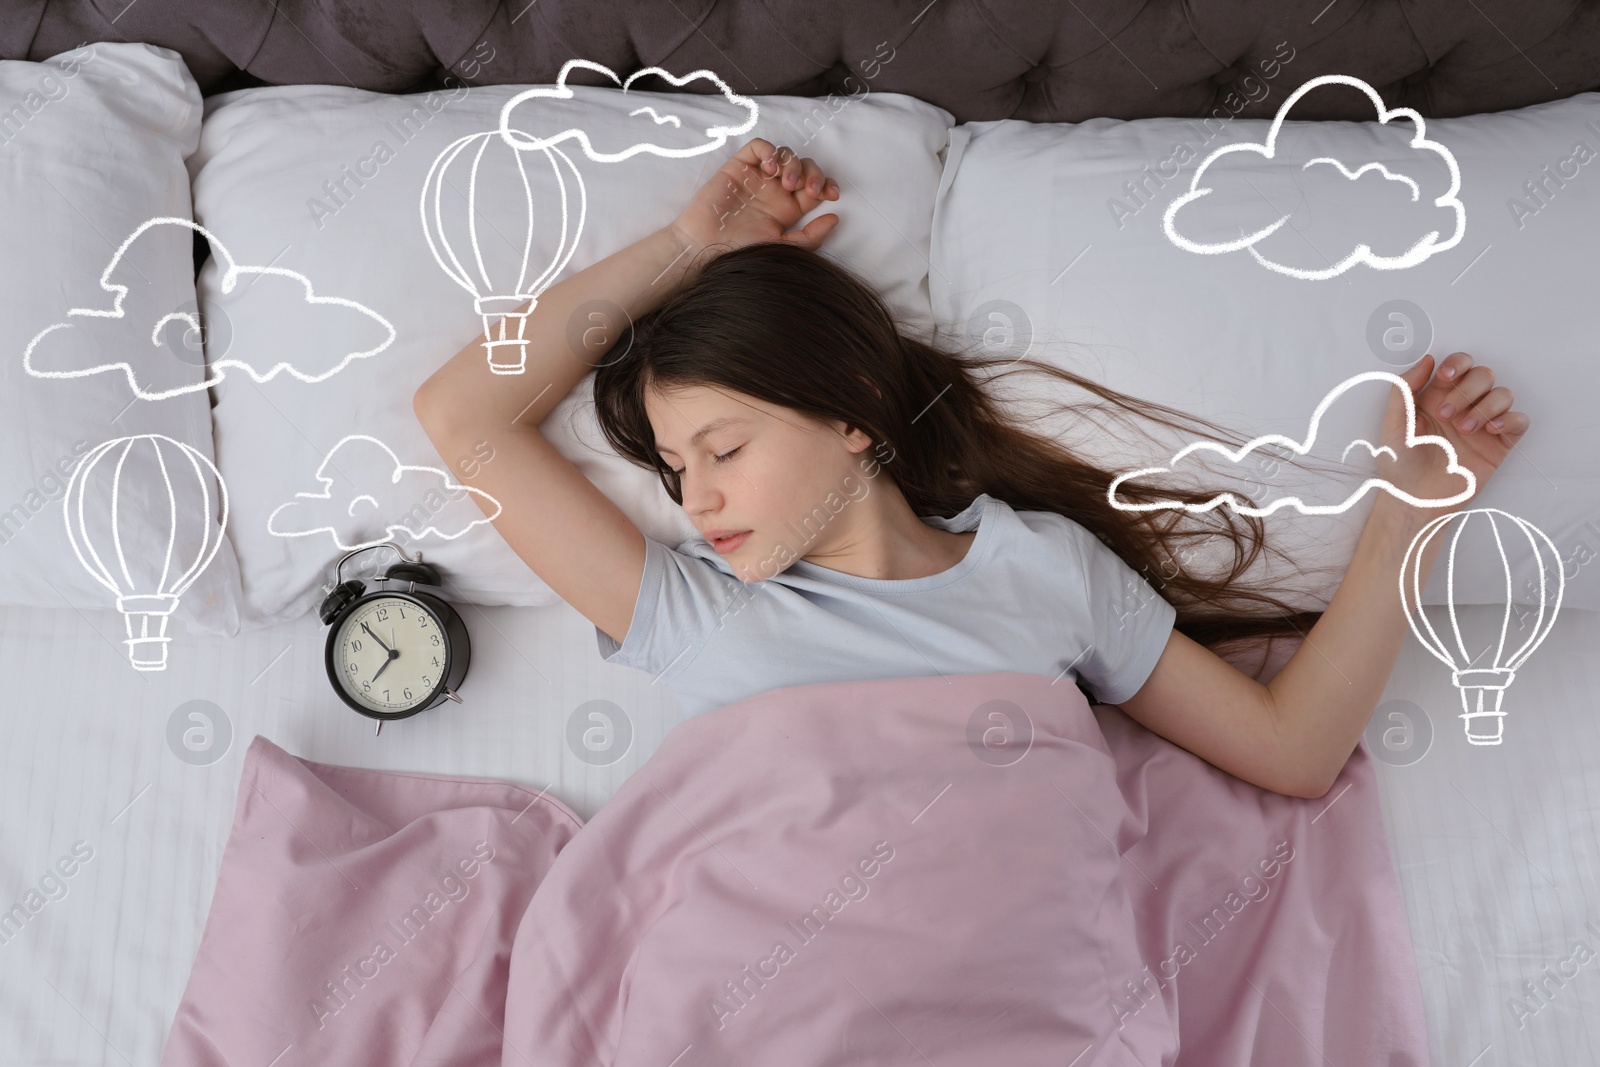 Image of Sweet dreams. Cute girl sleeping, above view. Hot air balloons and clouds illustrations on foreground